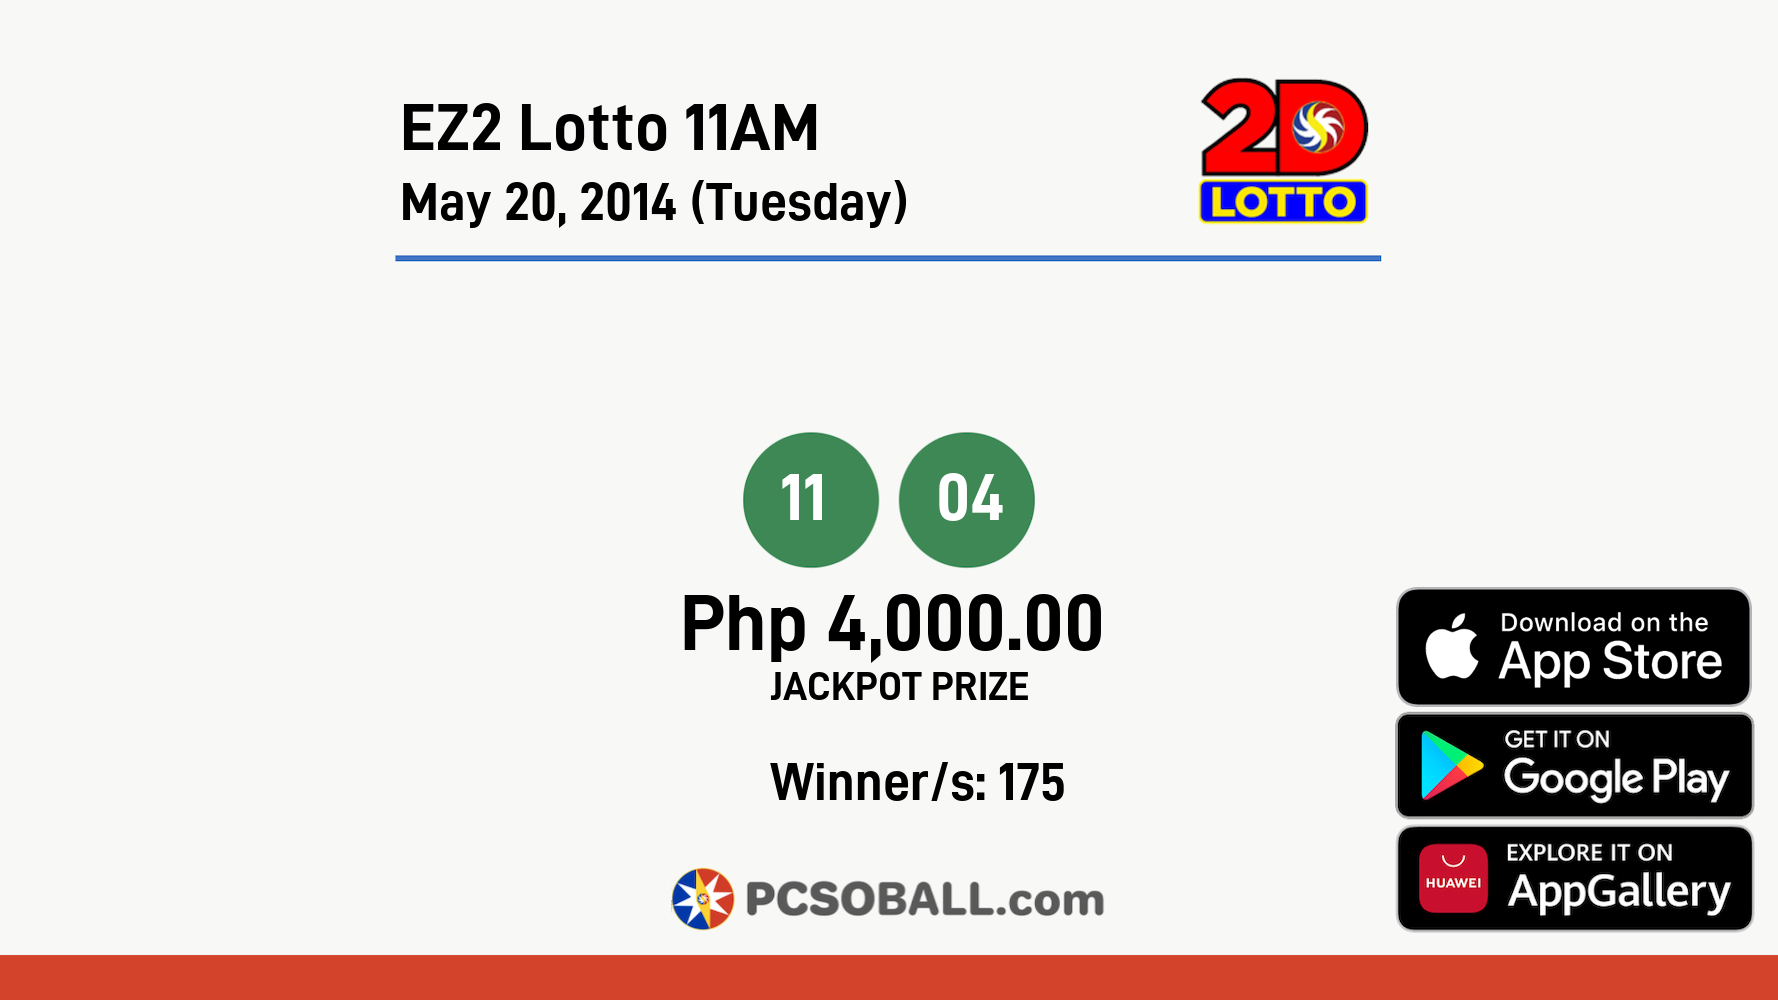 EZ2 Lotto 11AM May 20, 2014 (Tuesday) Result